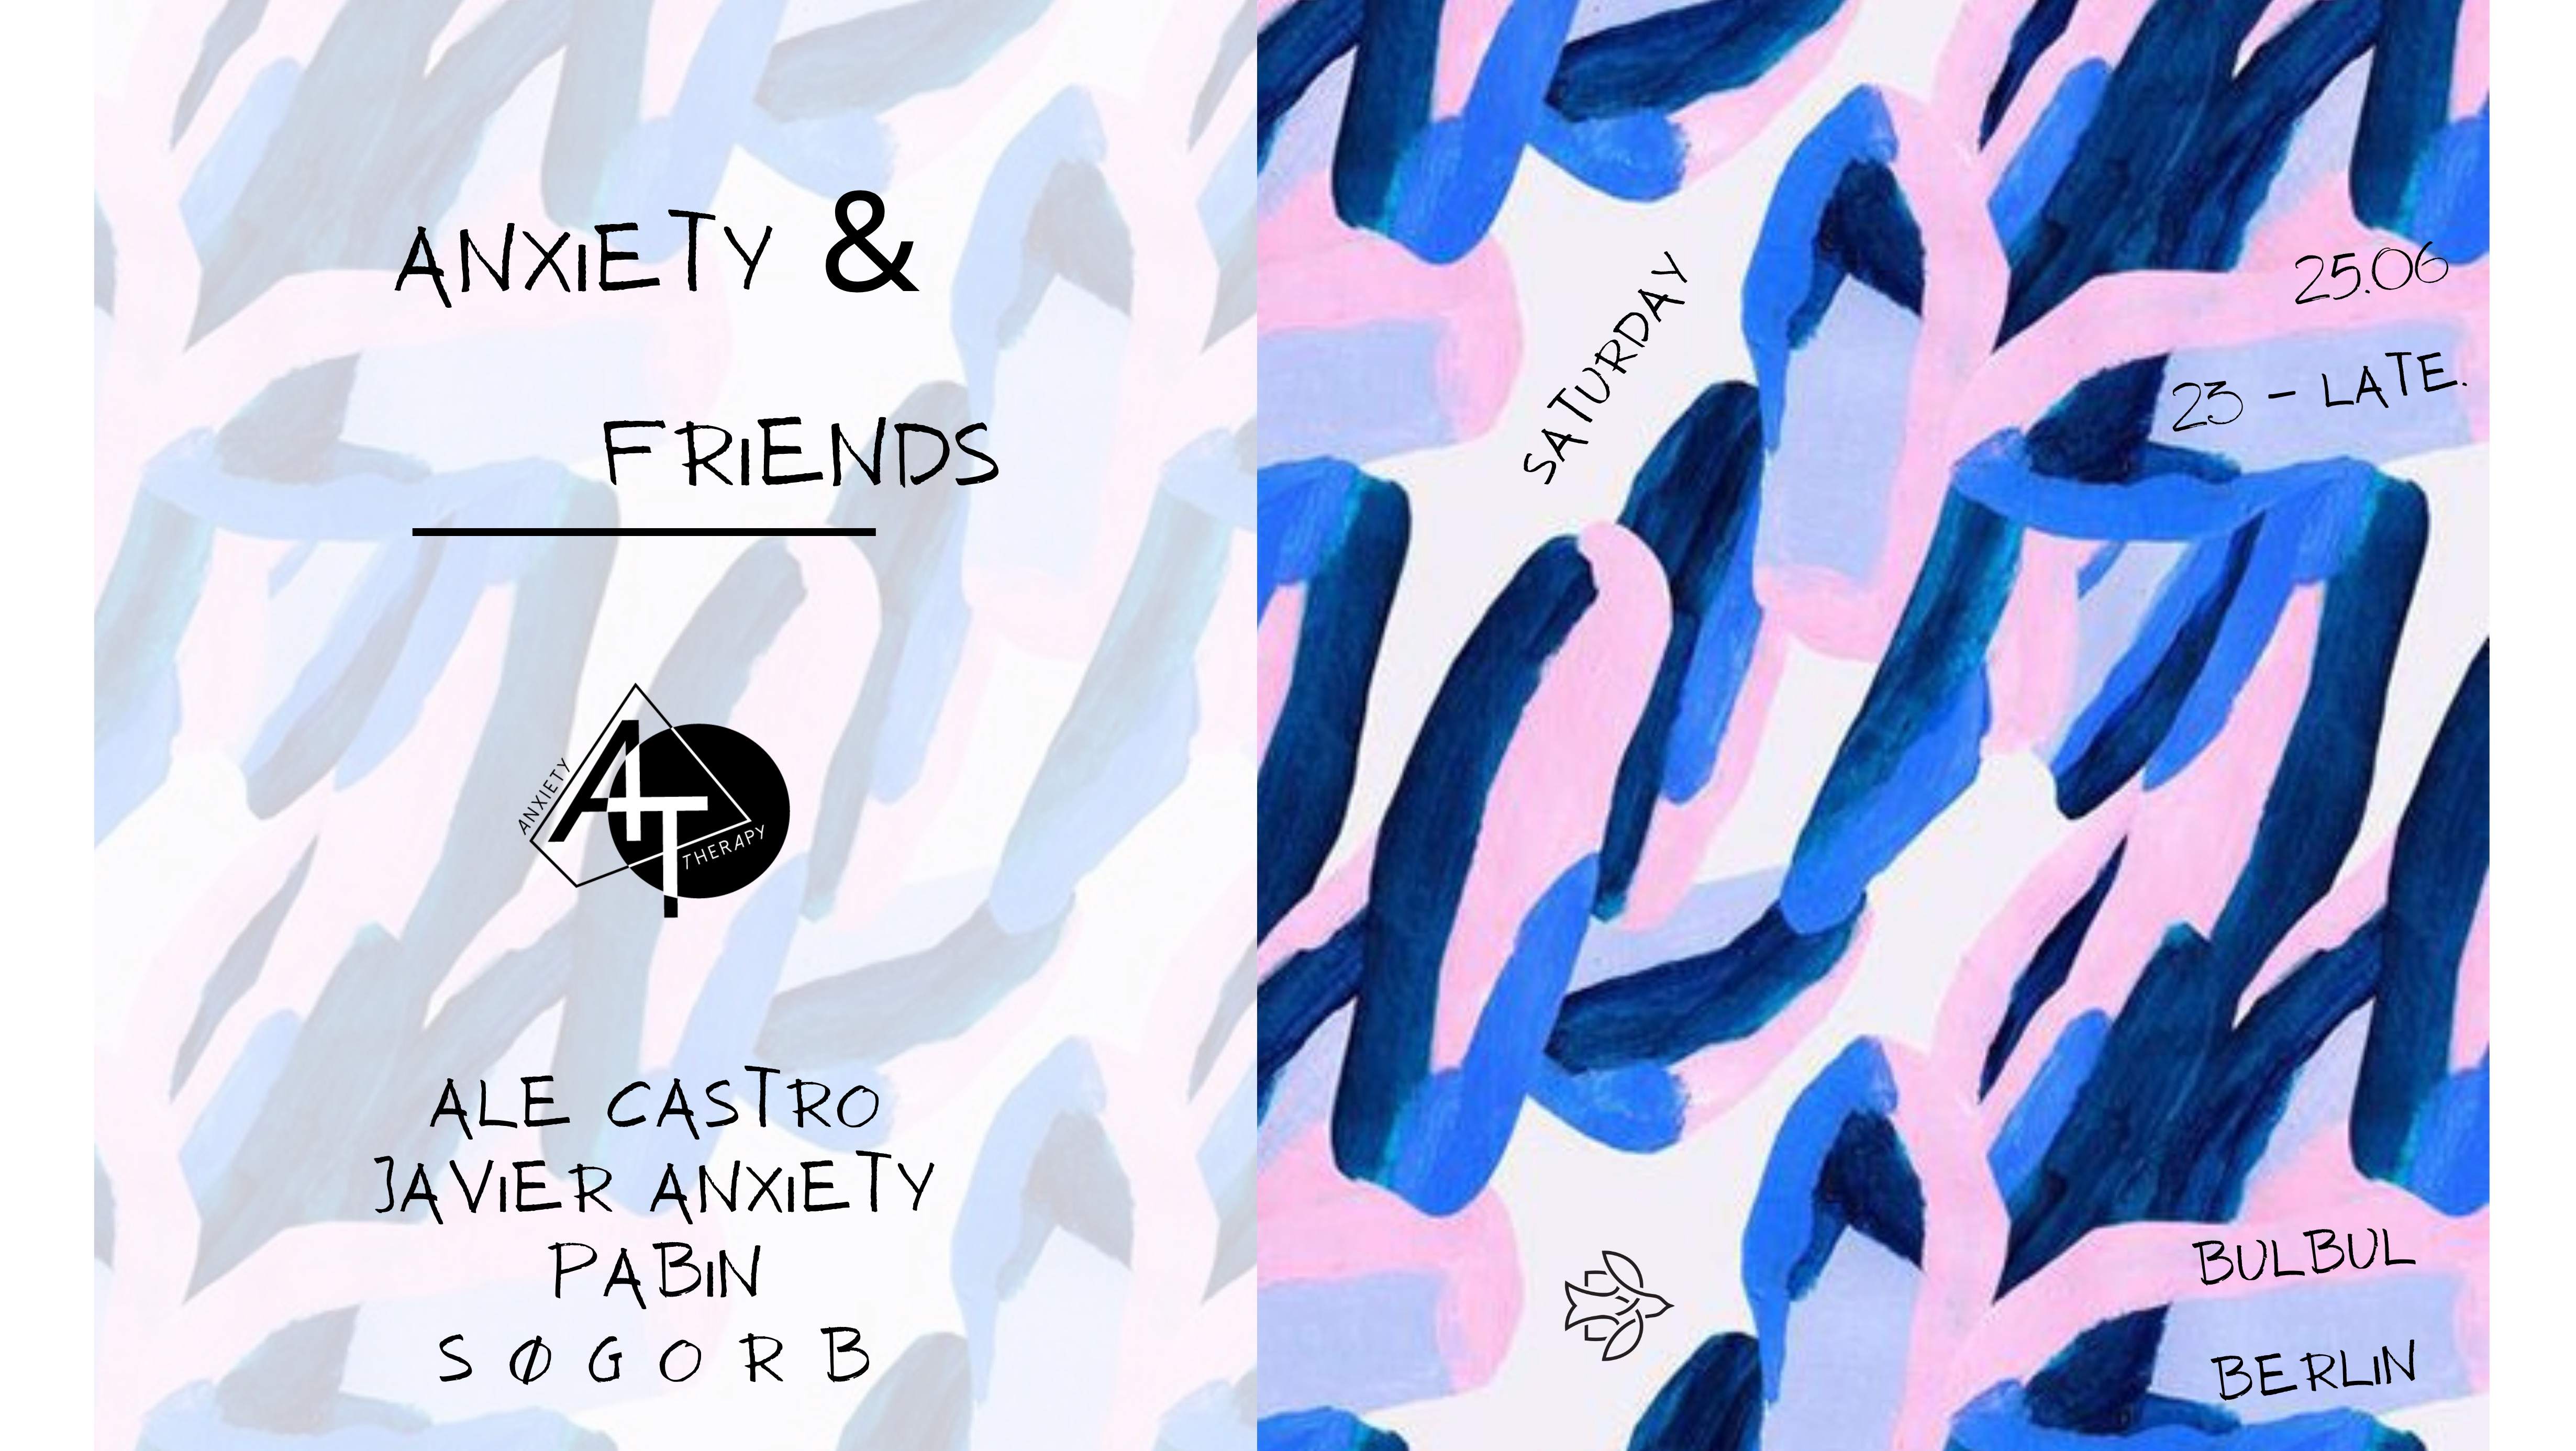 Anxiety & Friends: Ale Castro, Javier Anxiety, Søgorb, PABIN - フライヤー表